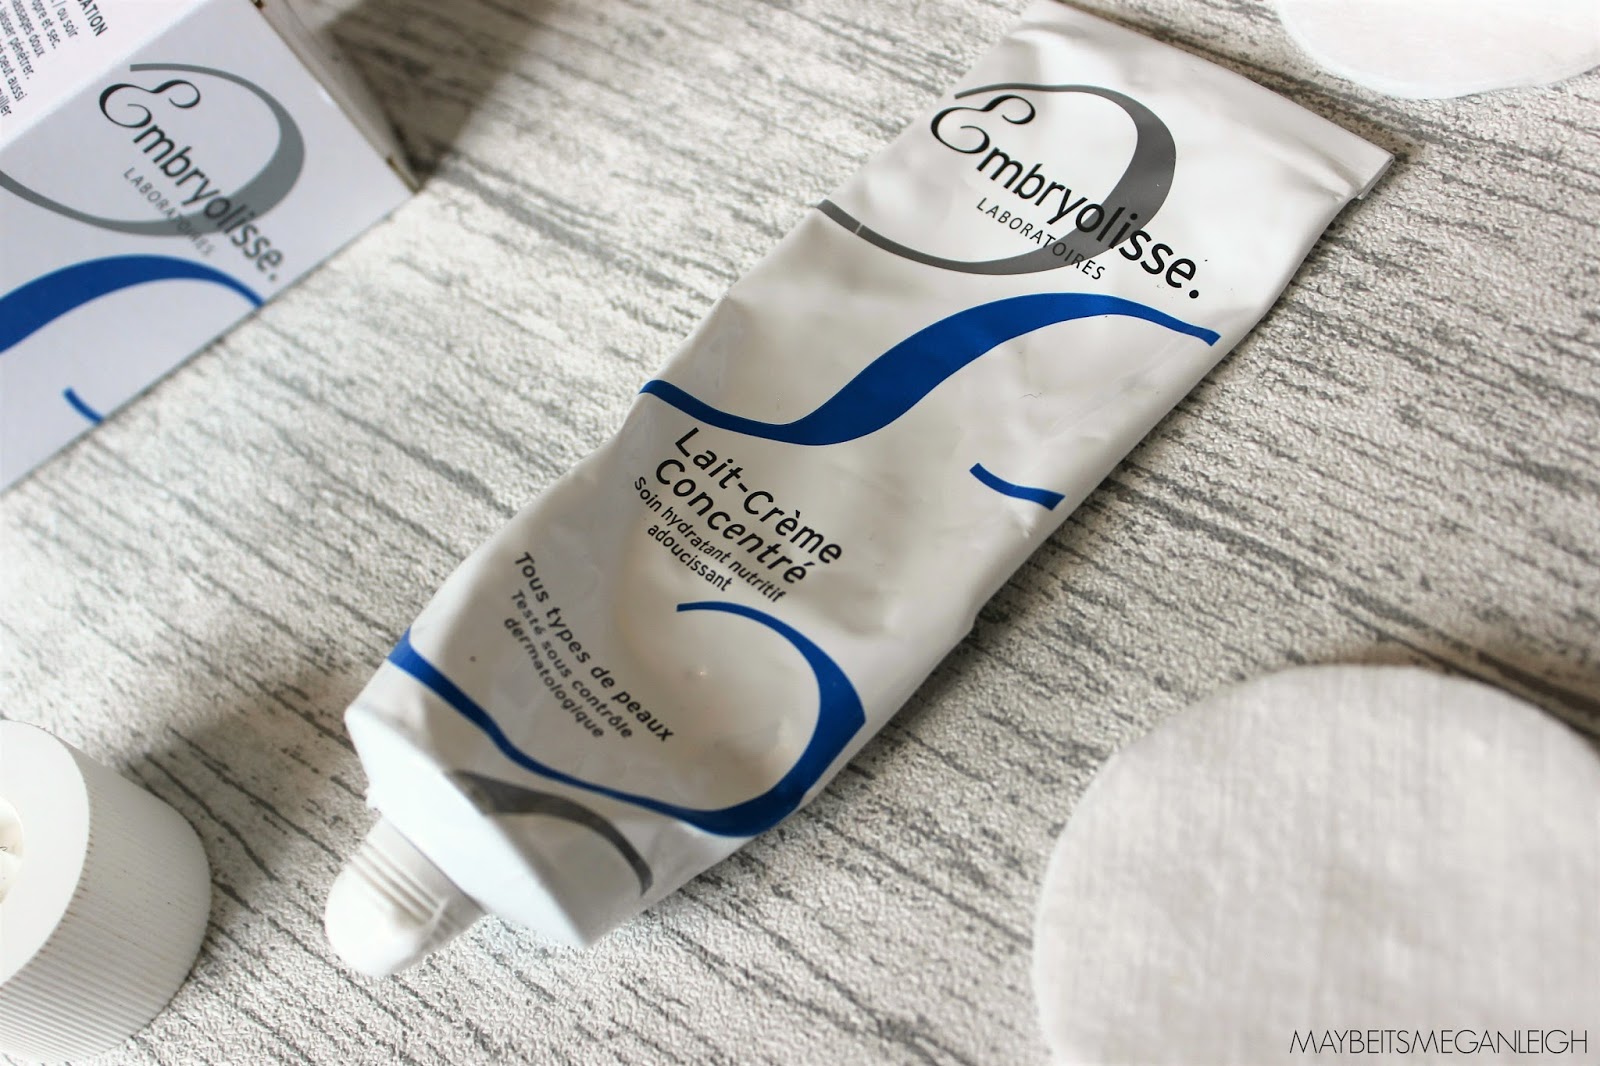 Winkelier waterstof Impressionisme Embryolisse Lait-Crème Concentré | The Miracle Cream - Maybe Its Megan Leigh